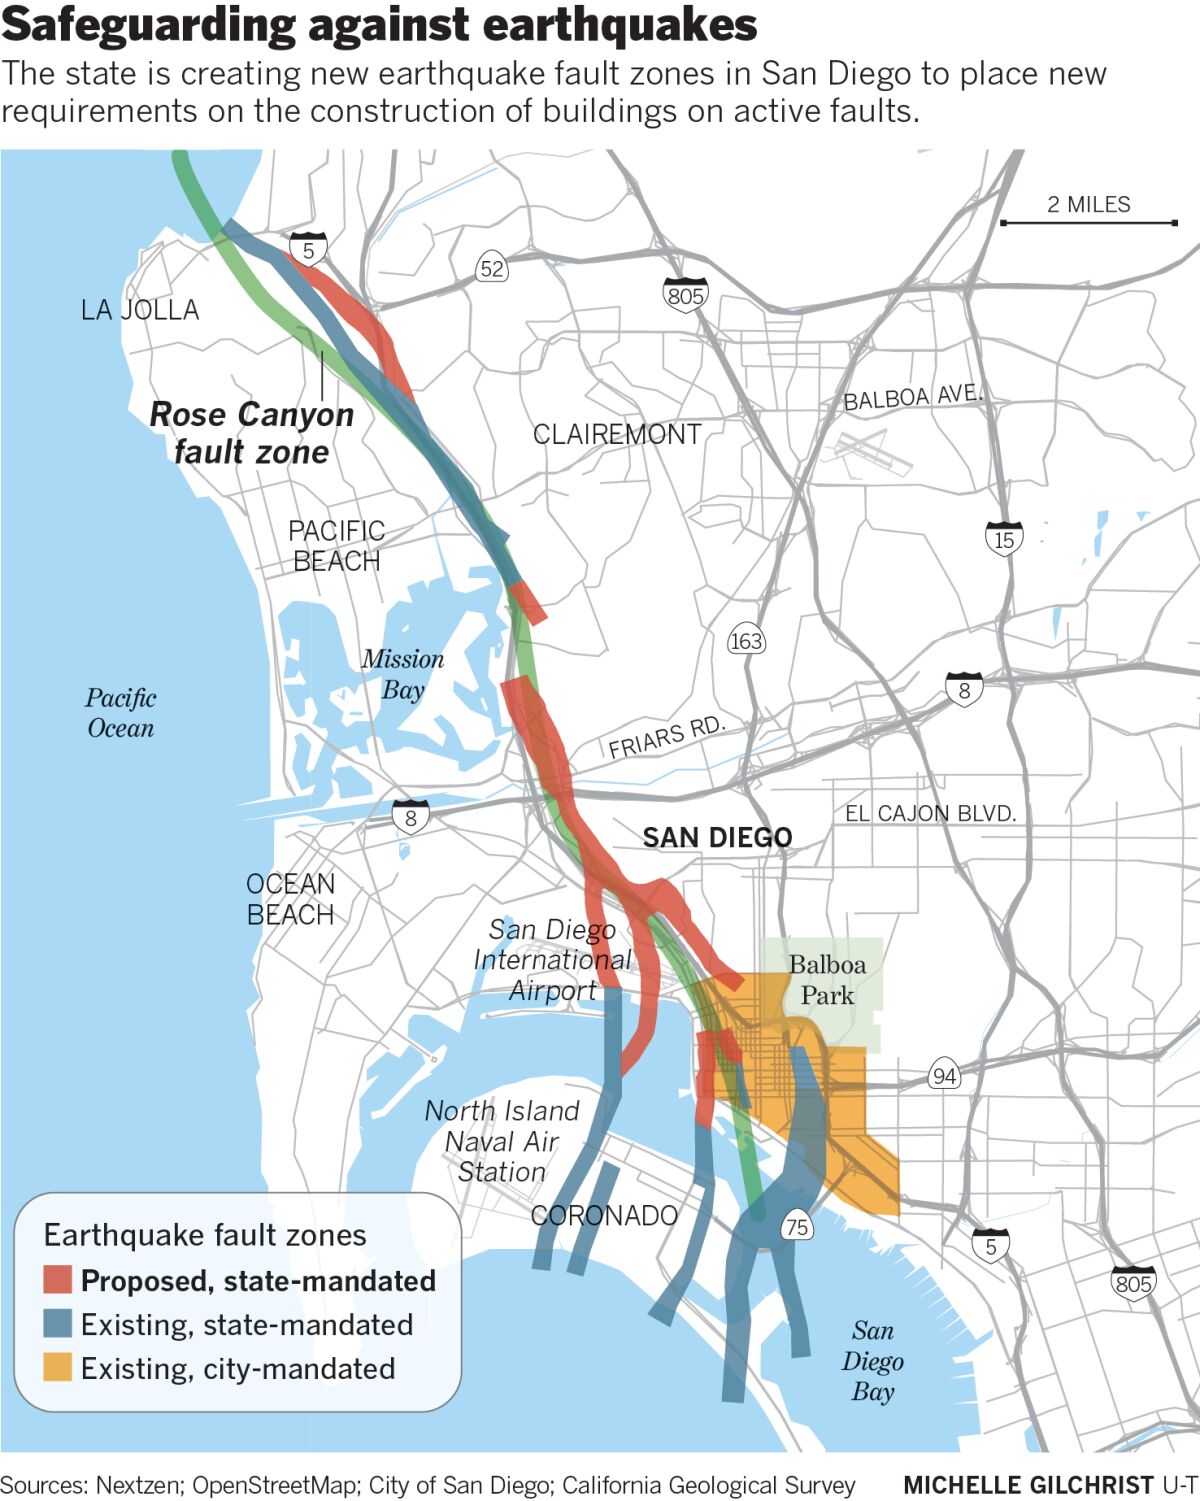 The state is creating new earthquake fault zones in San Diego